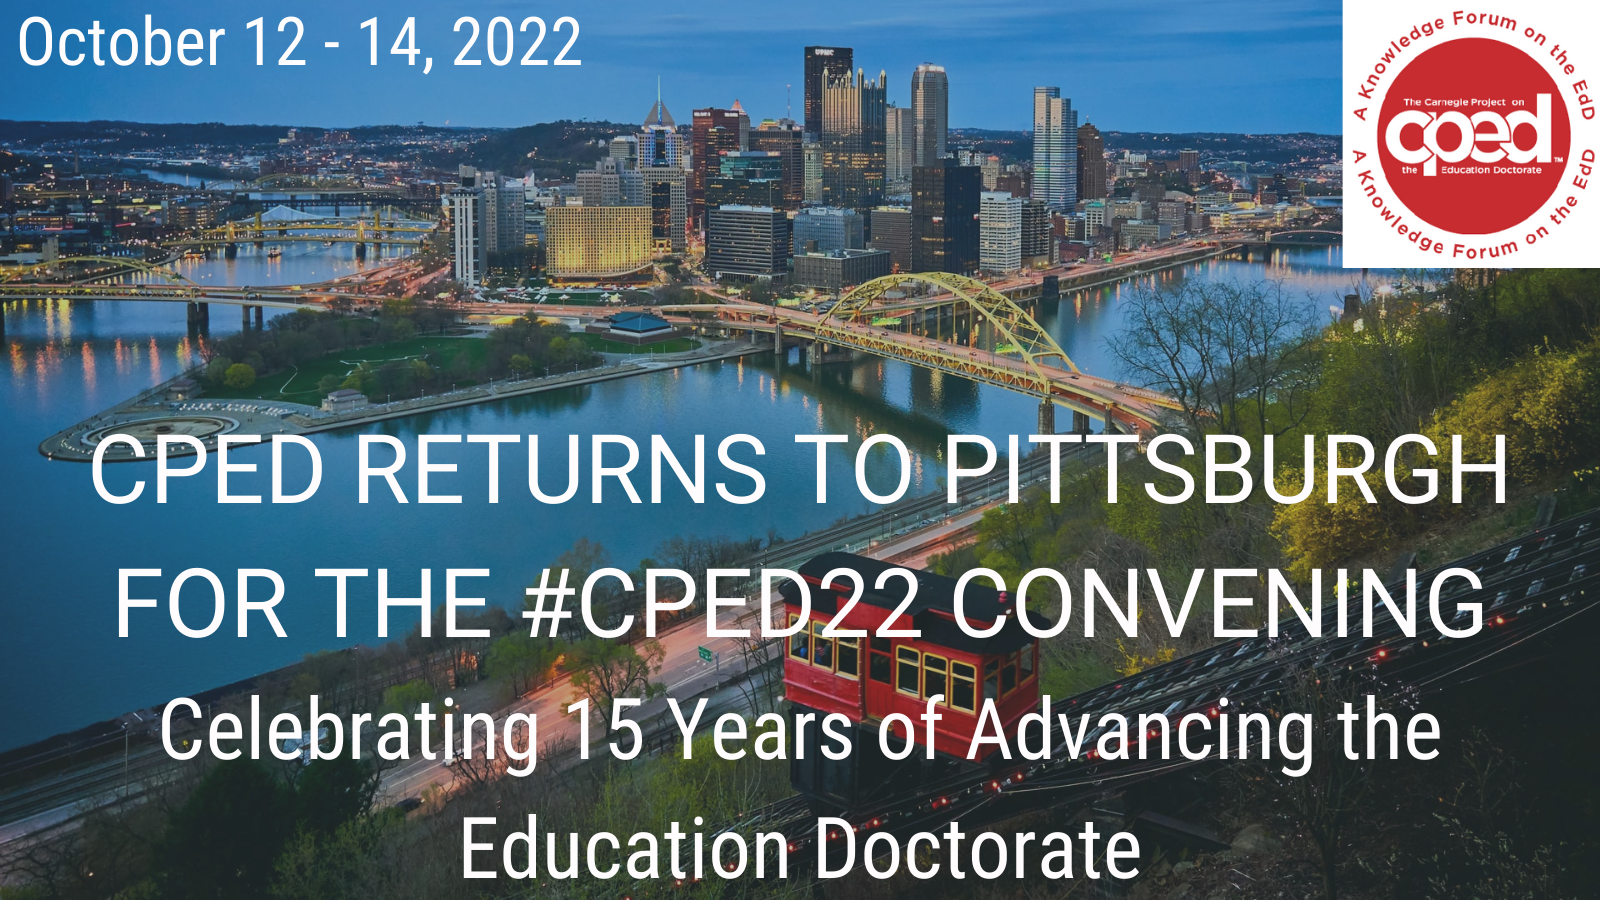 CPED returns to Pittsburgh for the October 2022 Convening. October 12-14, 2022.